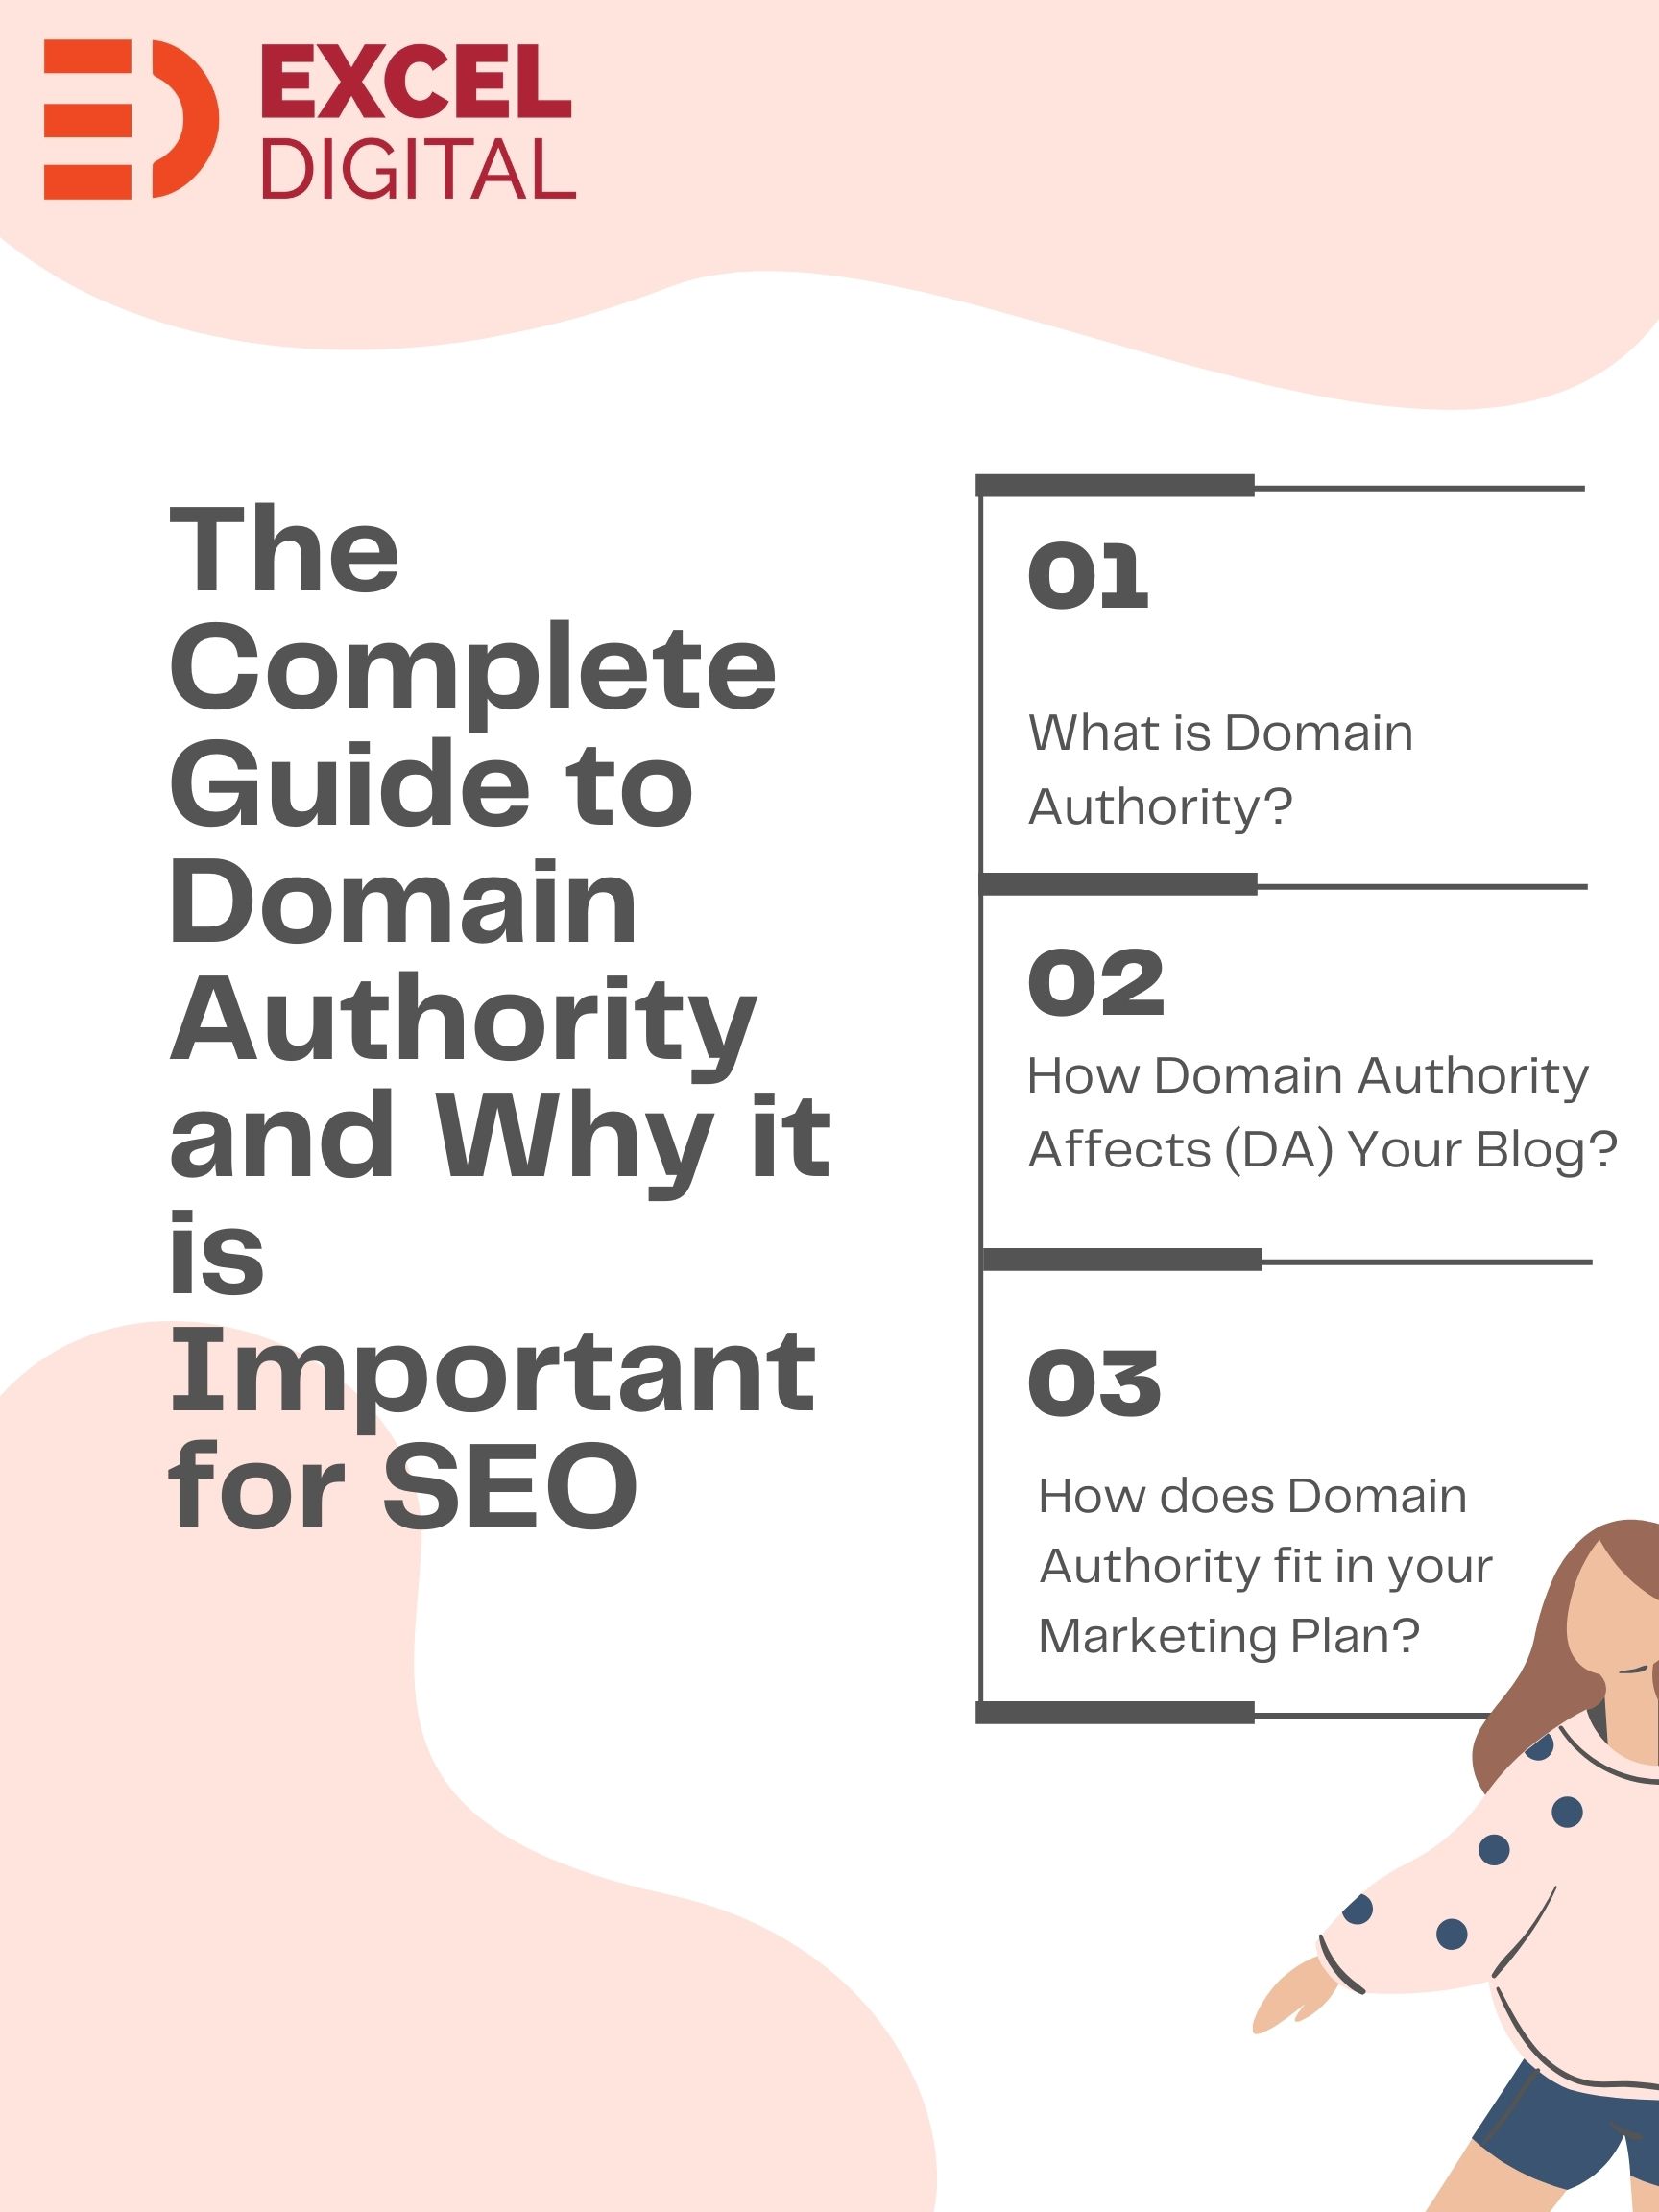 The Complete Guide to Domain Authority and Why it is Important for SEO post thumbnail image